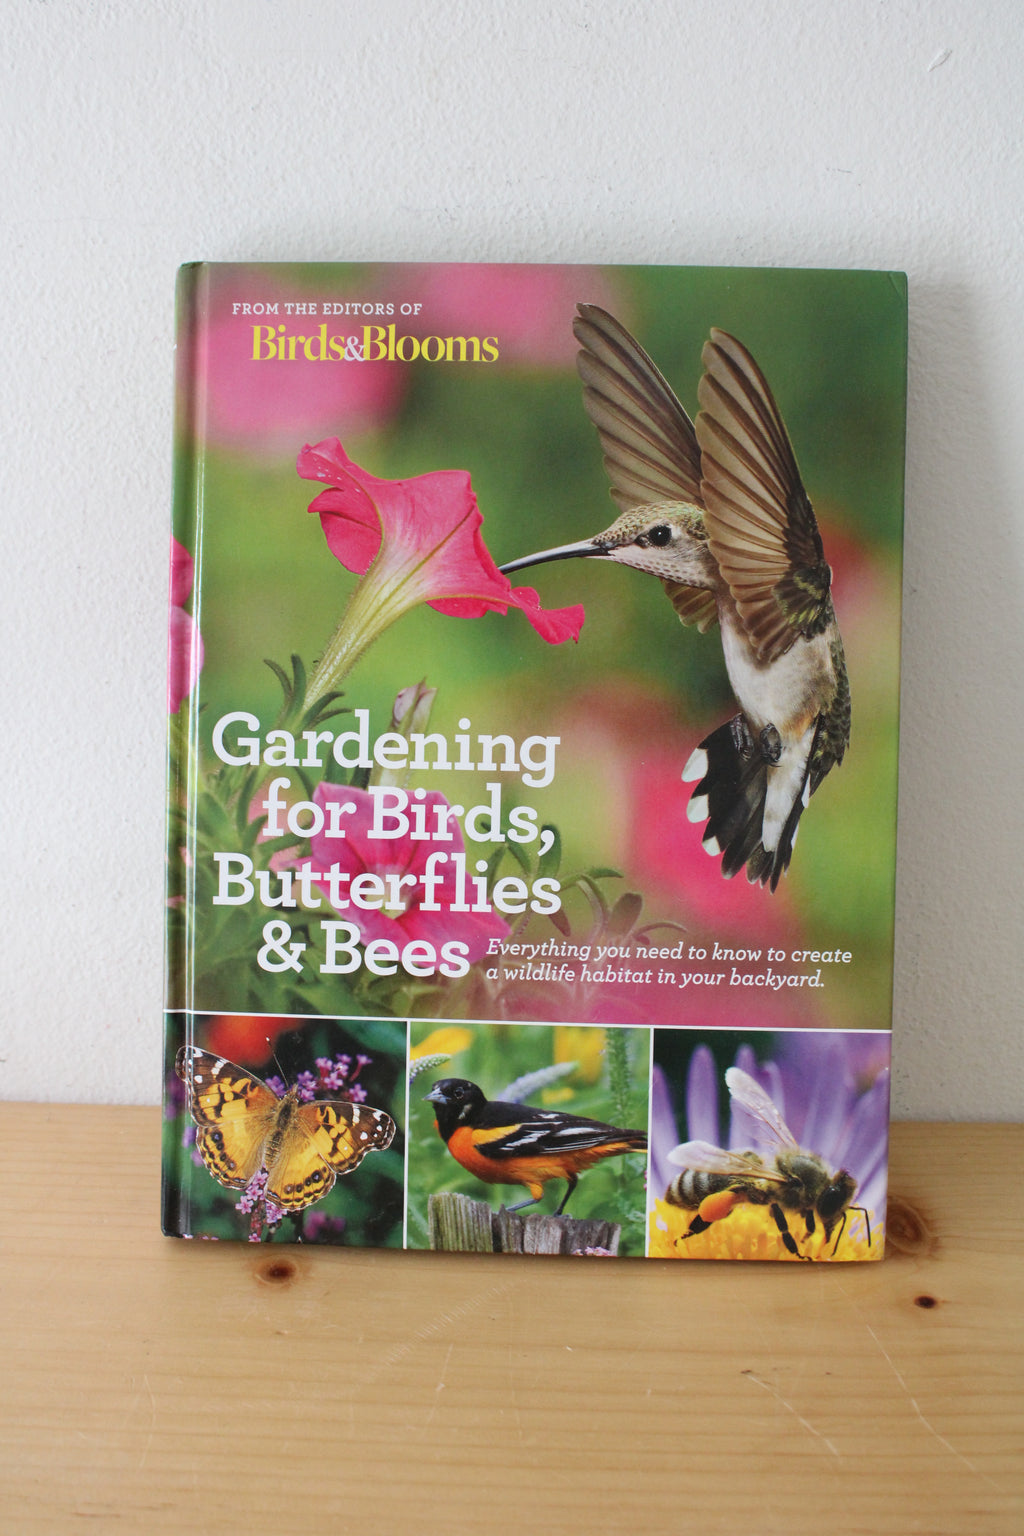 Gardening For Birds, Butterflies, and Bees (Everything You Need To Know To Create A Wildlife Habitat In Your Backyard). By Birds & Blooms